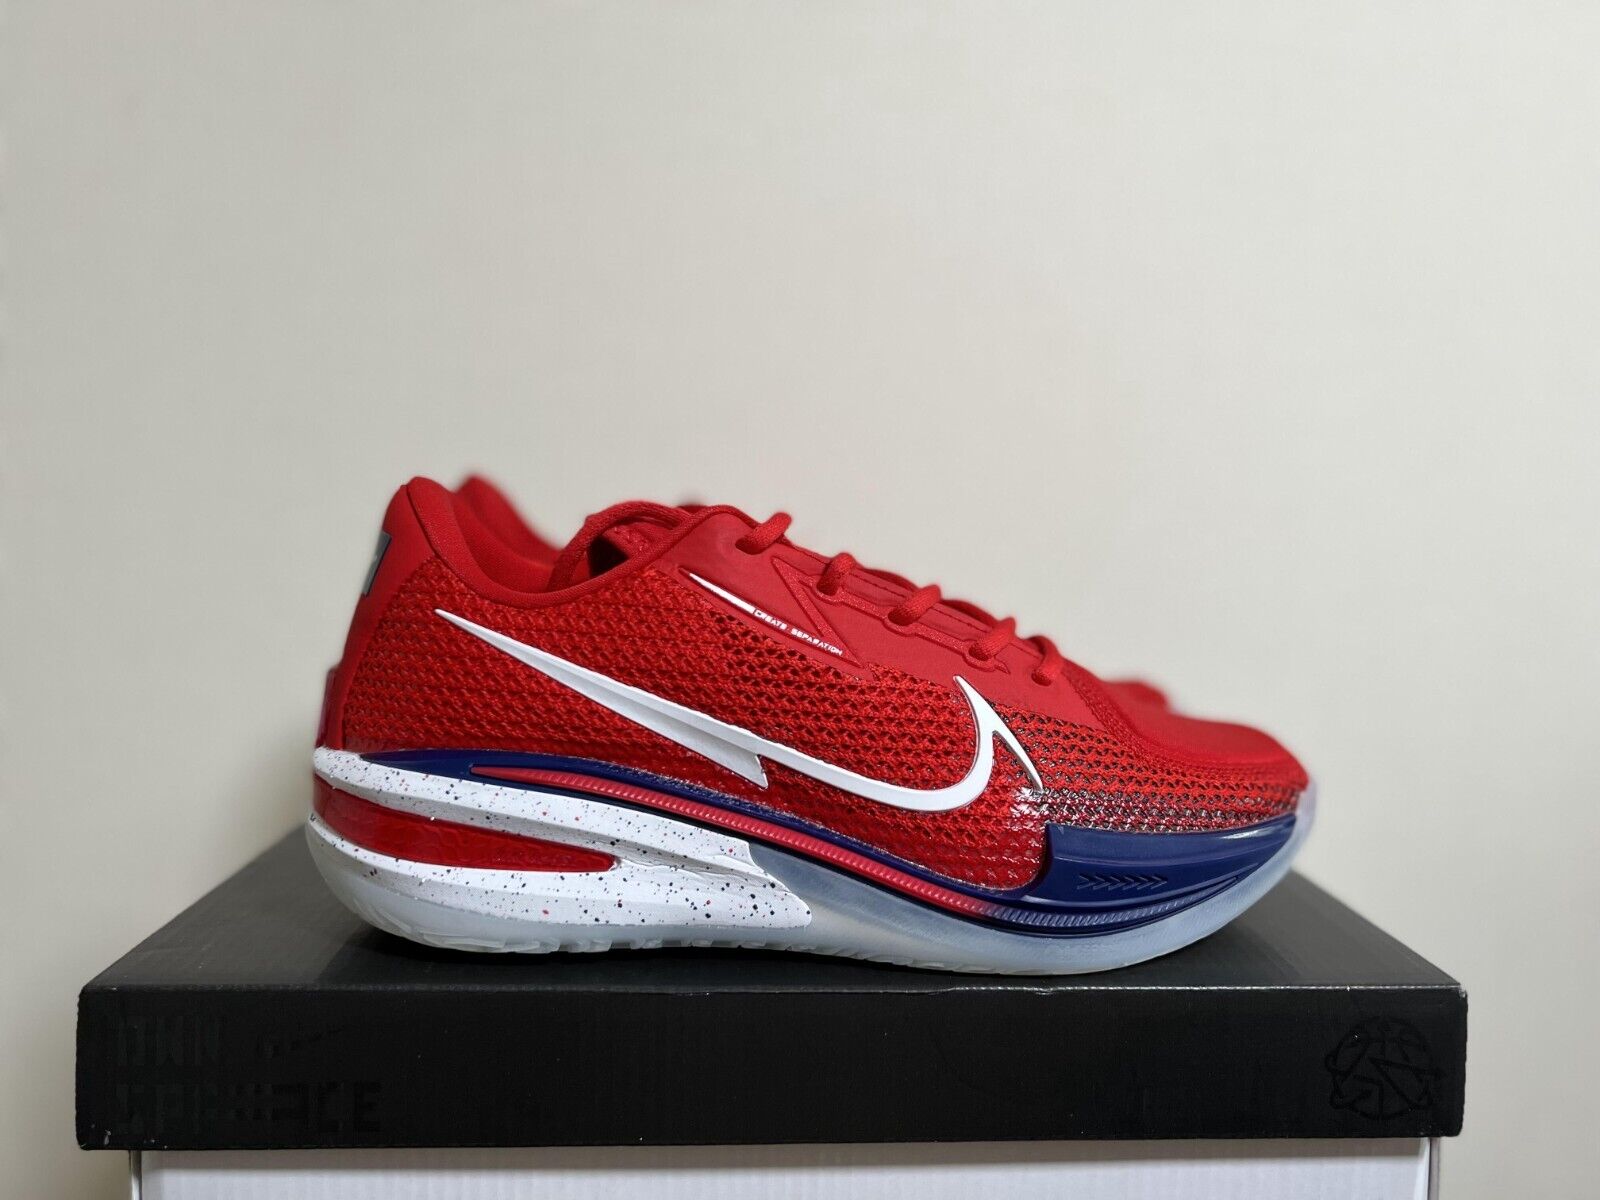 Pre-owned Nike Air Zoom G.t Red Size 8-12 Men's Cz0175-604 Sneakers